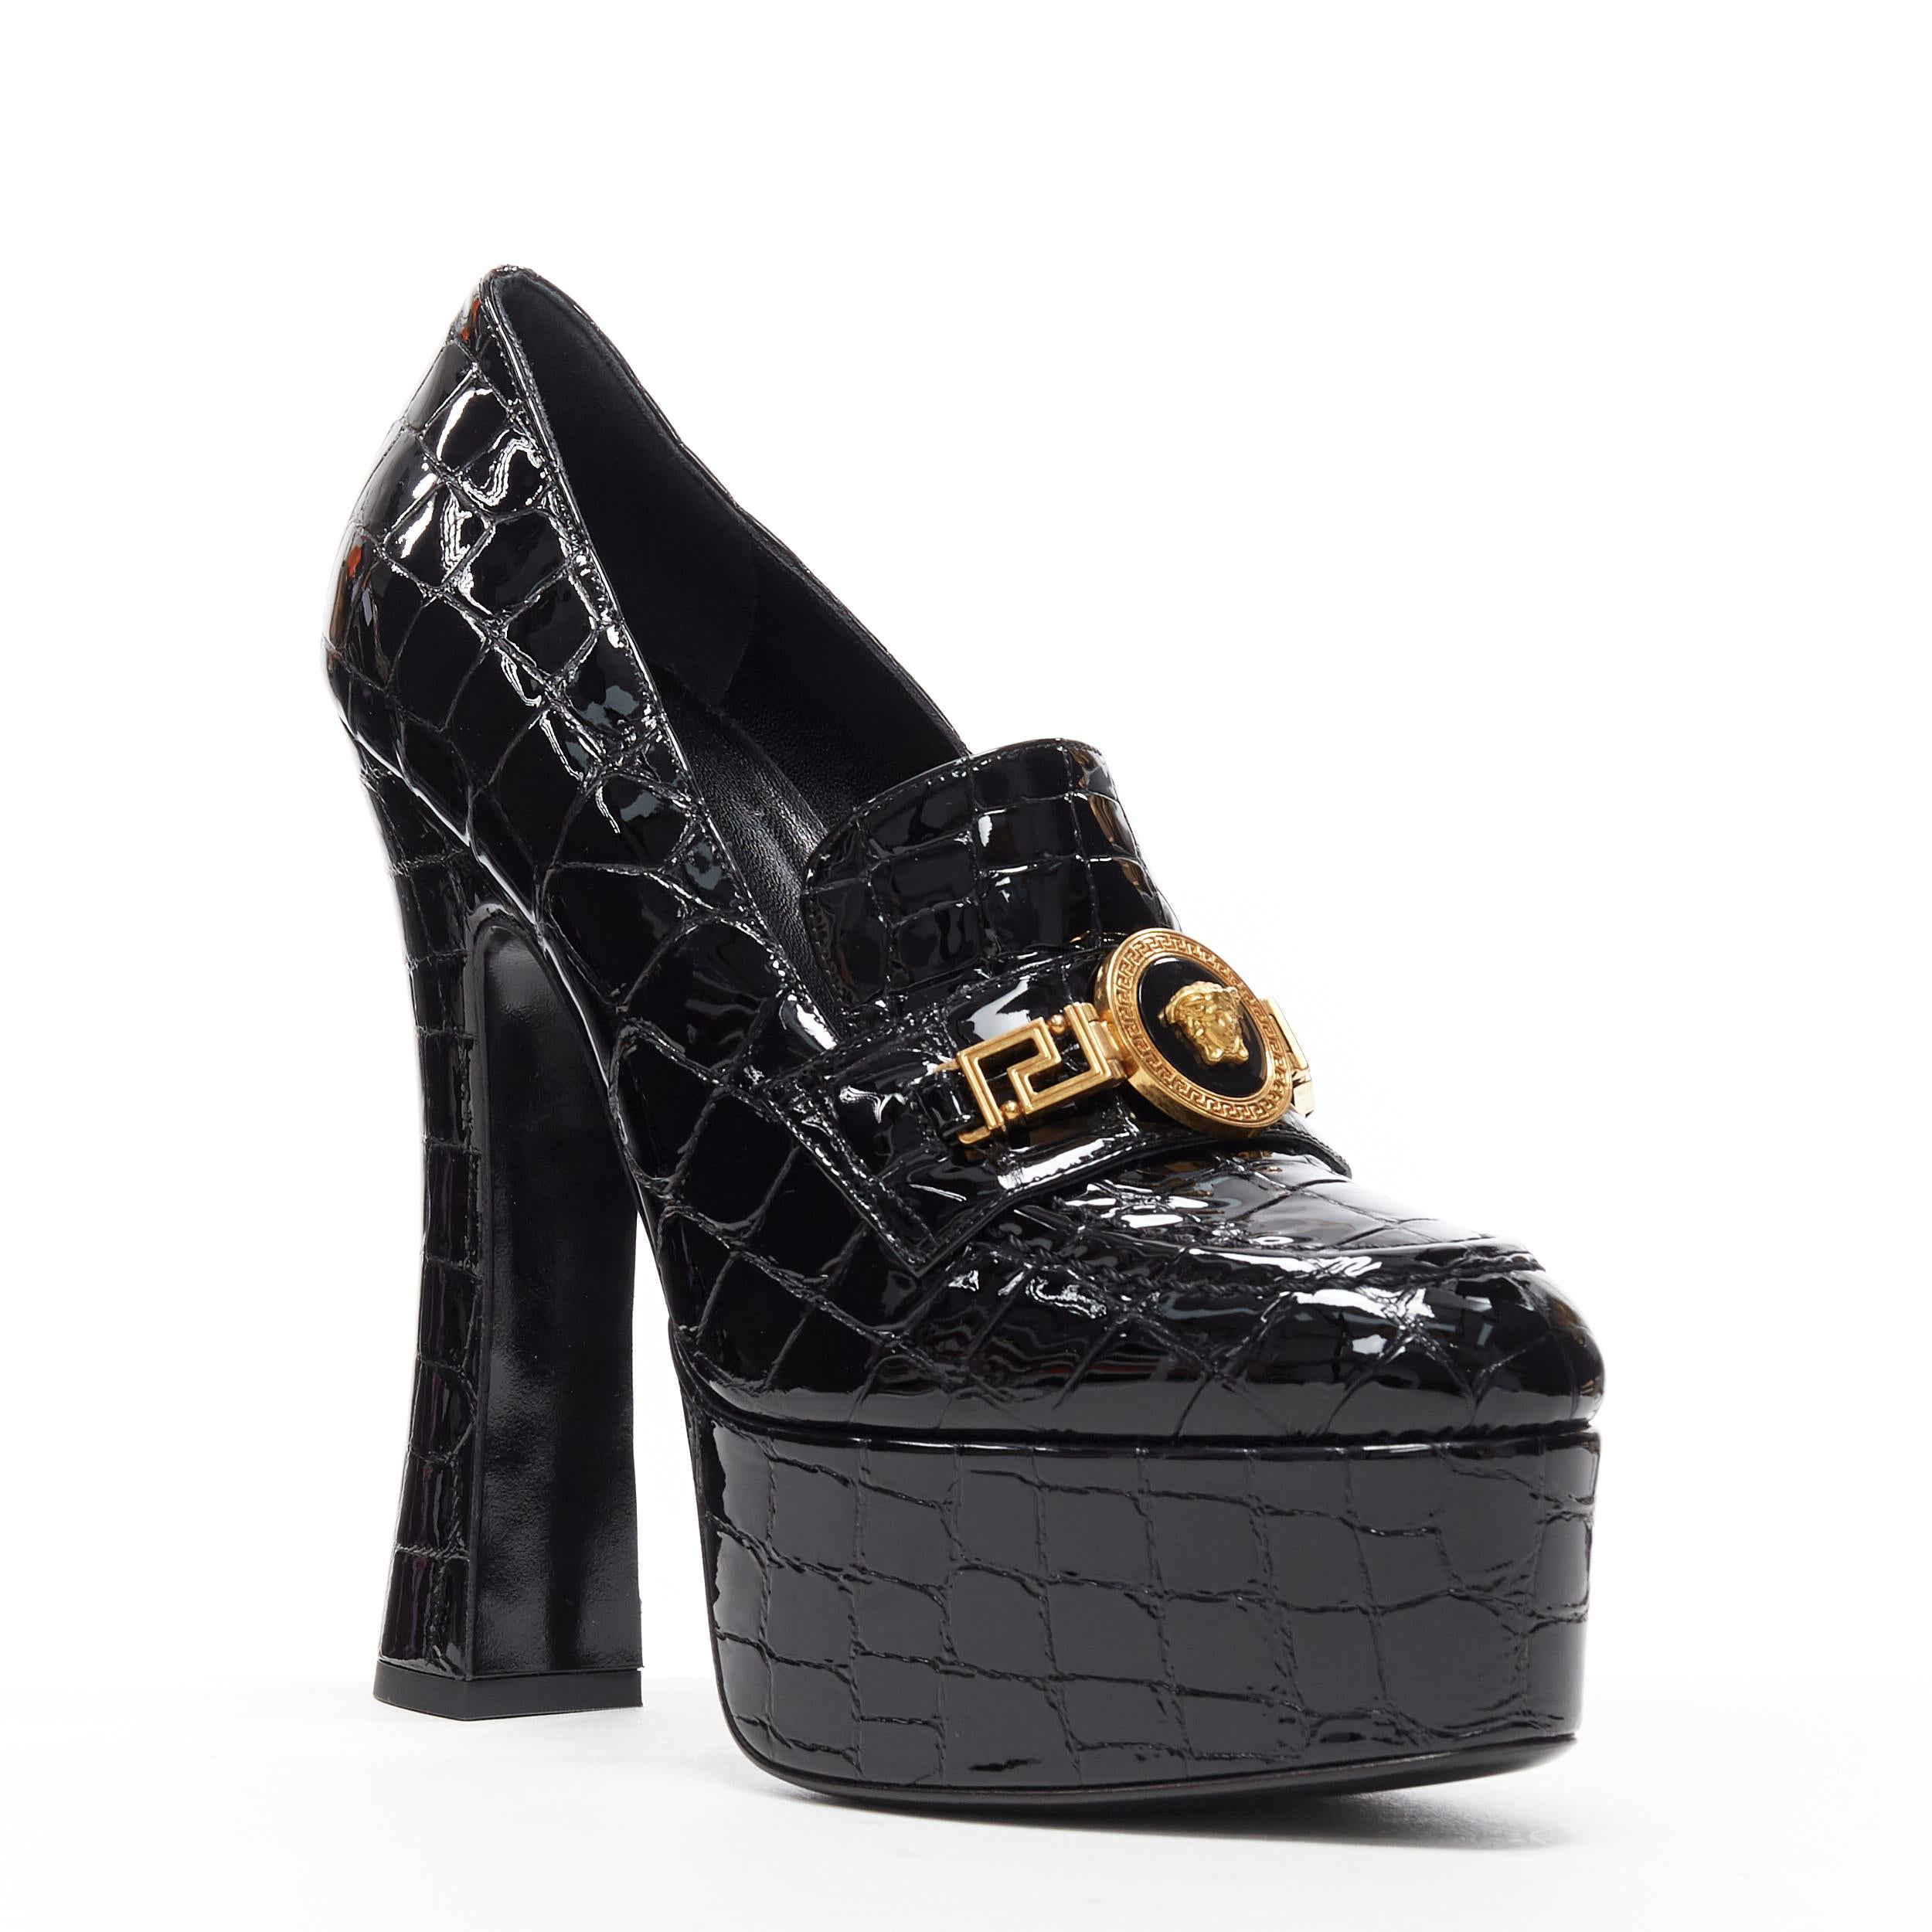 new VERSACE AW18 Runway black croc gold Medusa chain loafer platform heel EU37
Brand: Versace
Designer: Donatella Versace
Collection: Fall Winter 2018
Model Name / Style: Loafer platforms
Material: Patent leather
Color: Black
Pattern: Solid
Extra